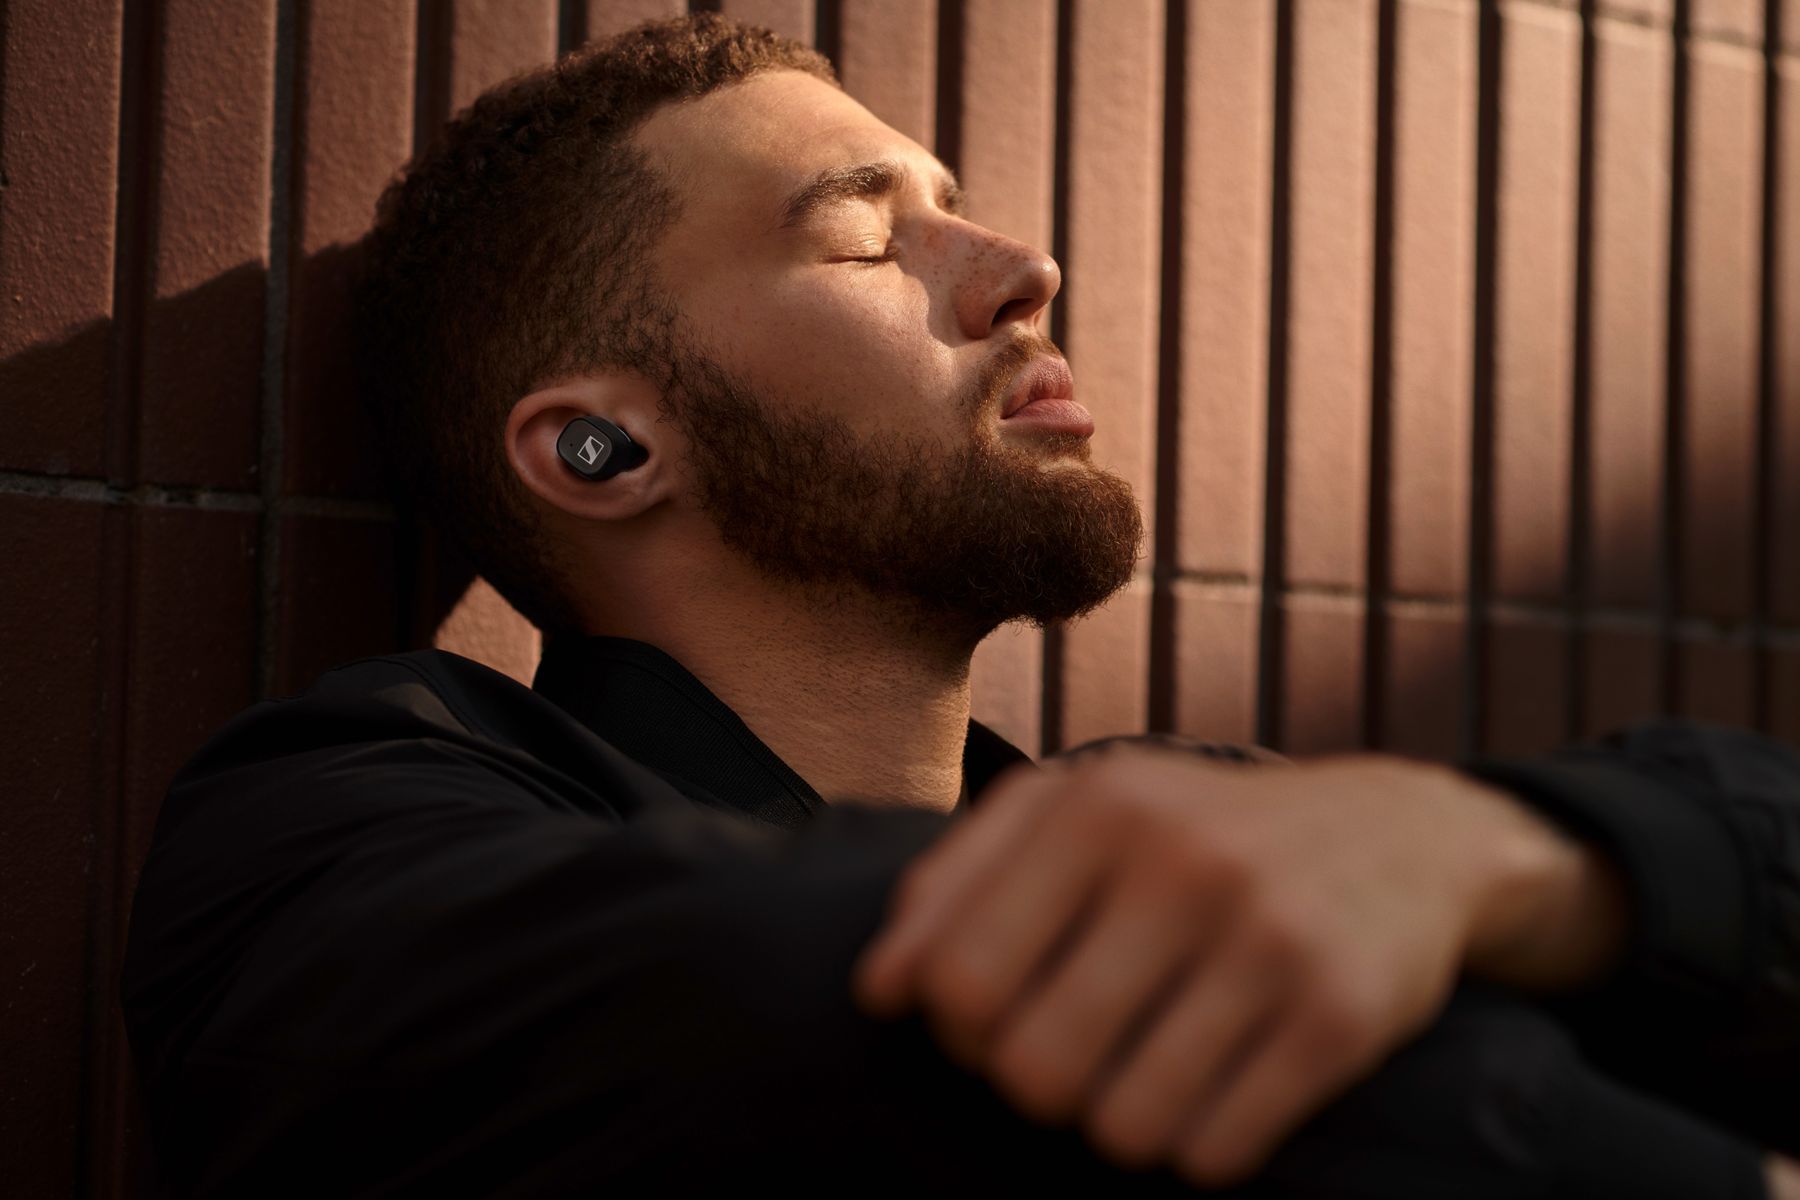 Comfort and style
​
Stylish, minimalist, and perfectly balanced, the earbuds’ ergonomic design offers all-day wearing comfort, while their exacting build quality ensures take-anywhere durability. For a perfect fit in the ear that effectively attenuates outside noise, adapters are provided in a choice of four sizes.
​